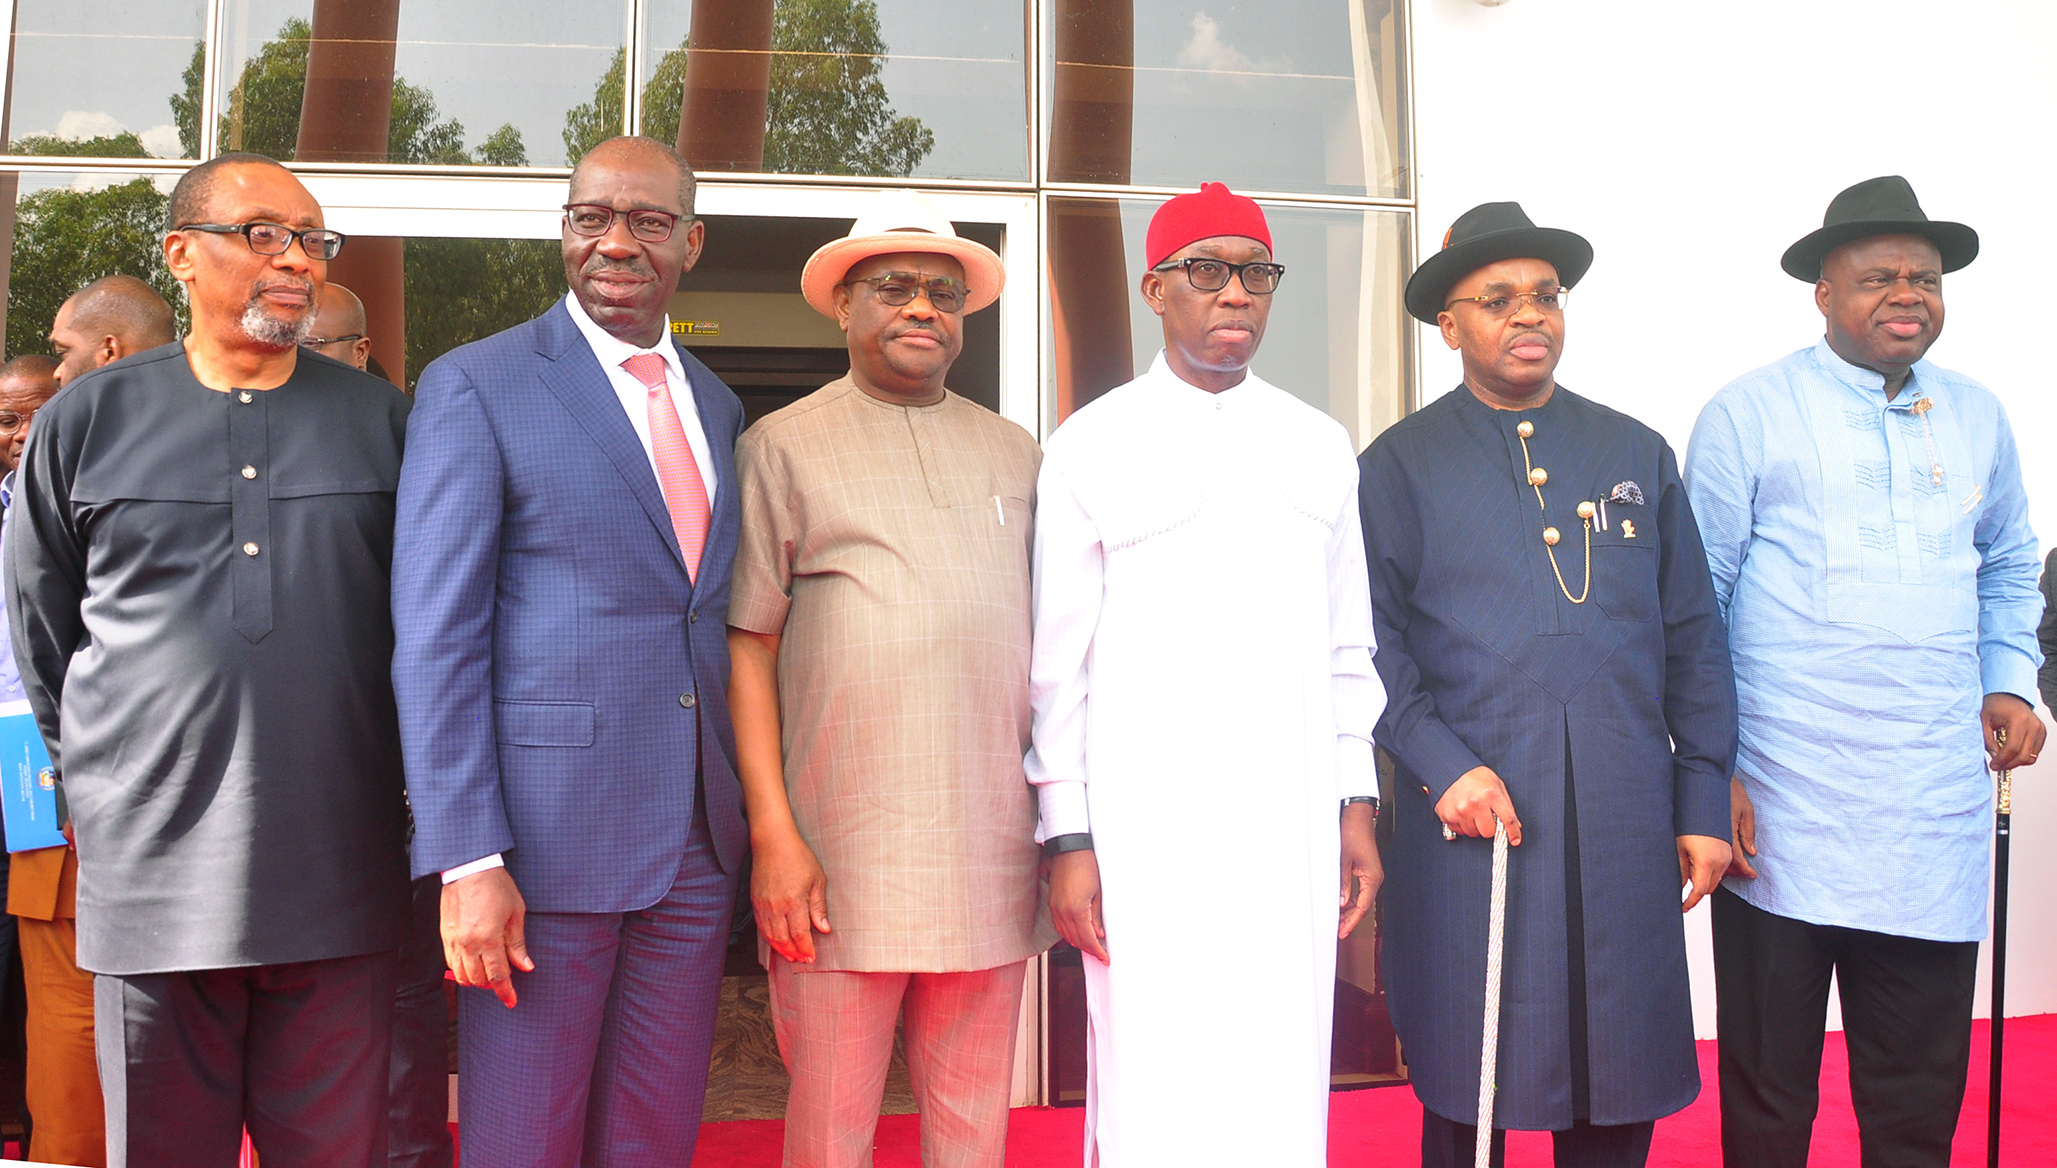 South-South governors move to set up regional security outfit